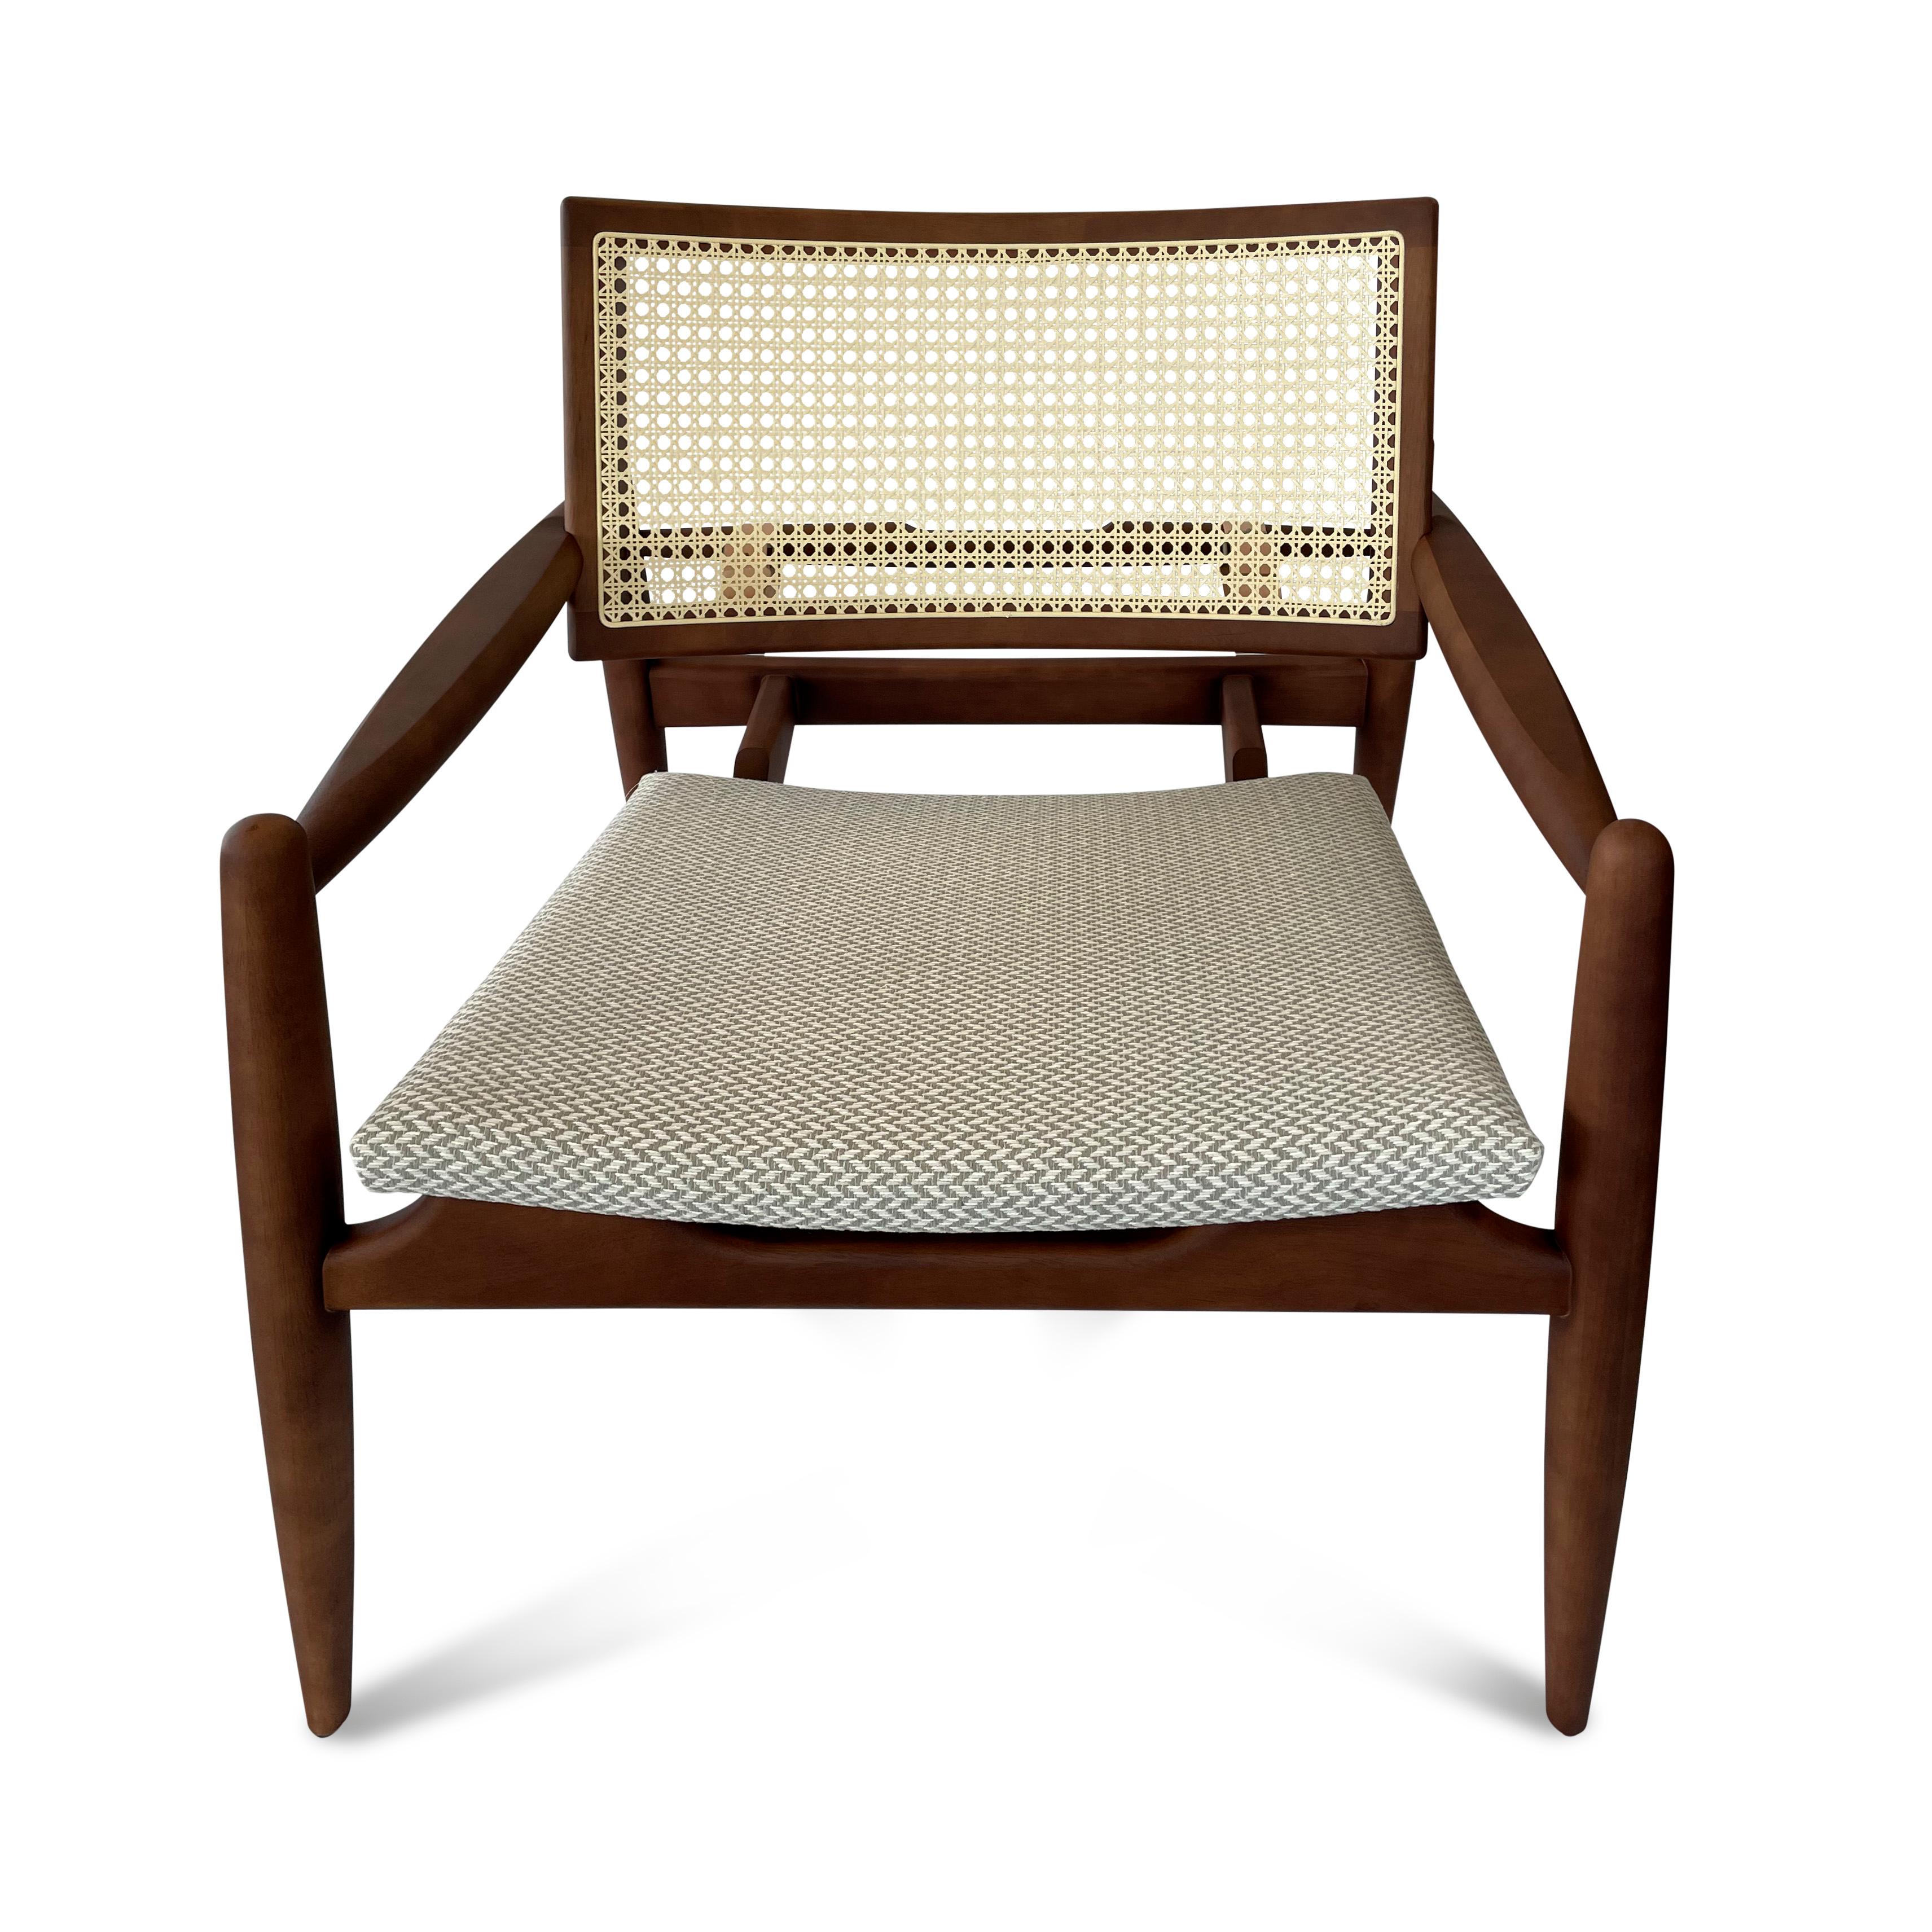 The Uultis design team has created the Soho curved cane with a cane curved back with a walnut wood finish for all those people that are looking for an elegant but vintage look in their bedrooms, living rooms, and offices. This chair has everything